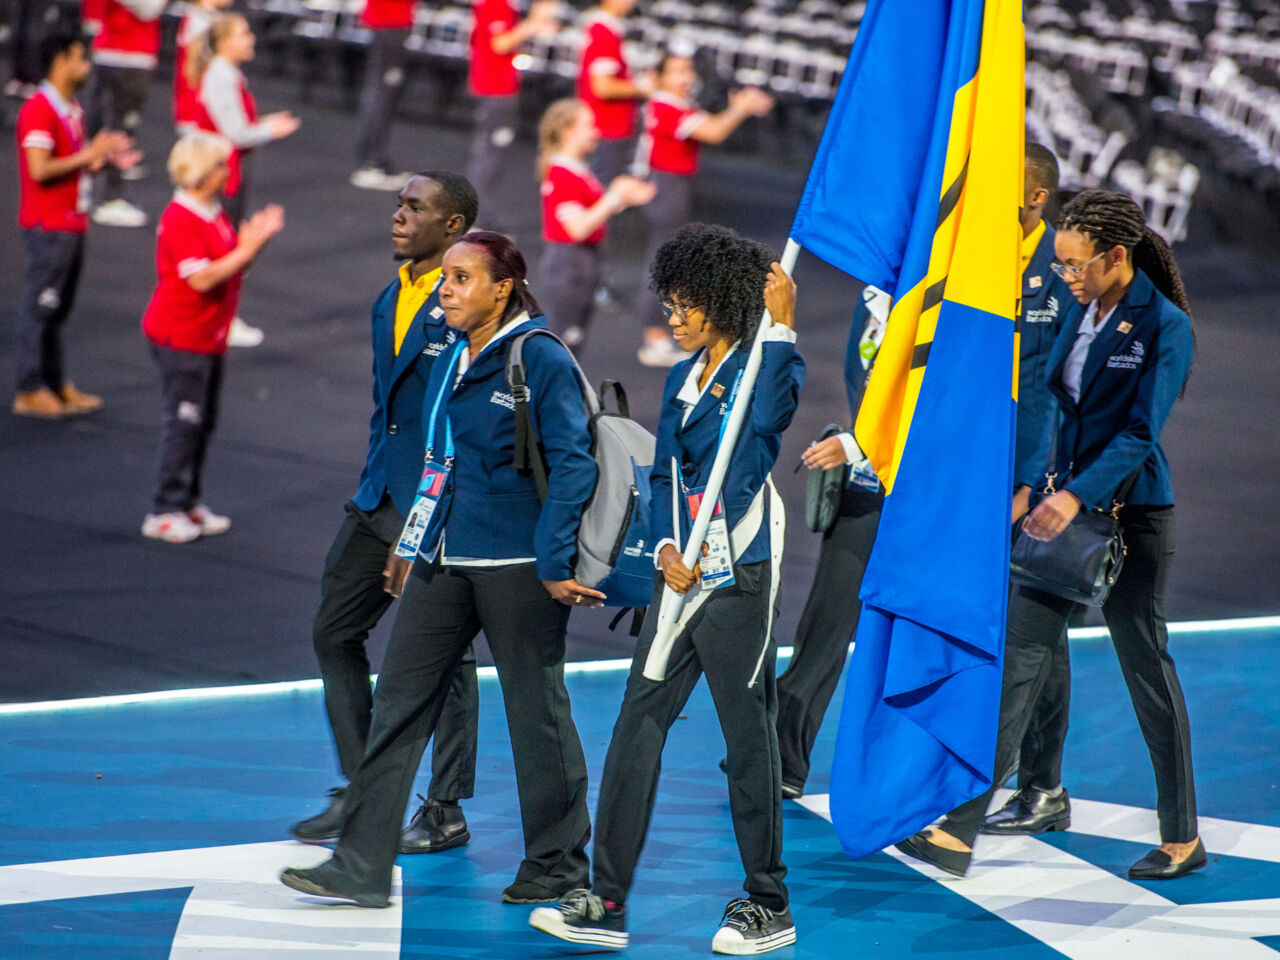 Shae White with her fellow competitors in the Barbados team at the Opening Ceremony of WorldSkills Kazan 2019.
